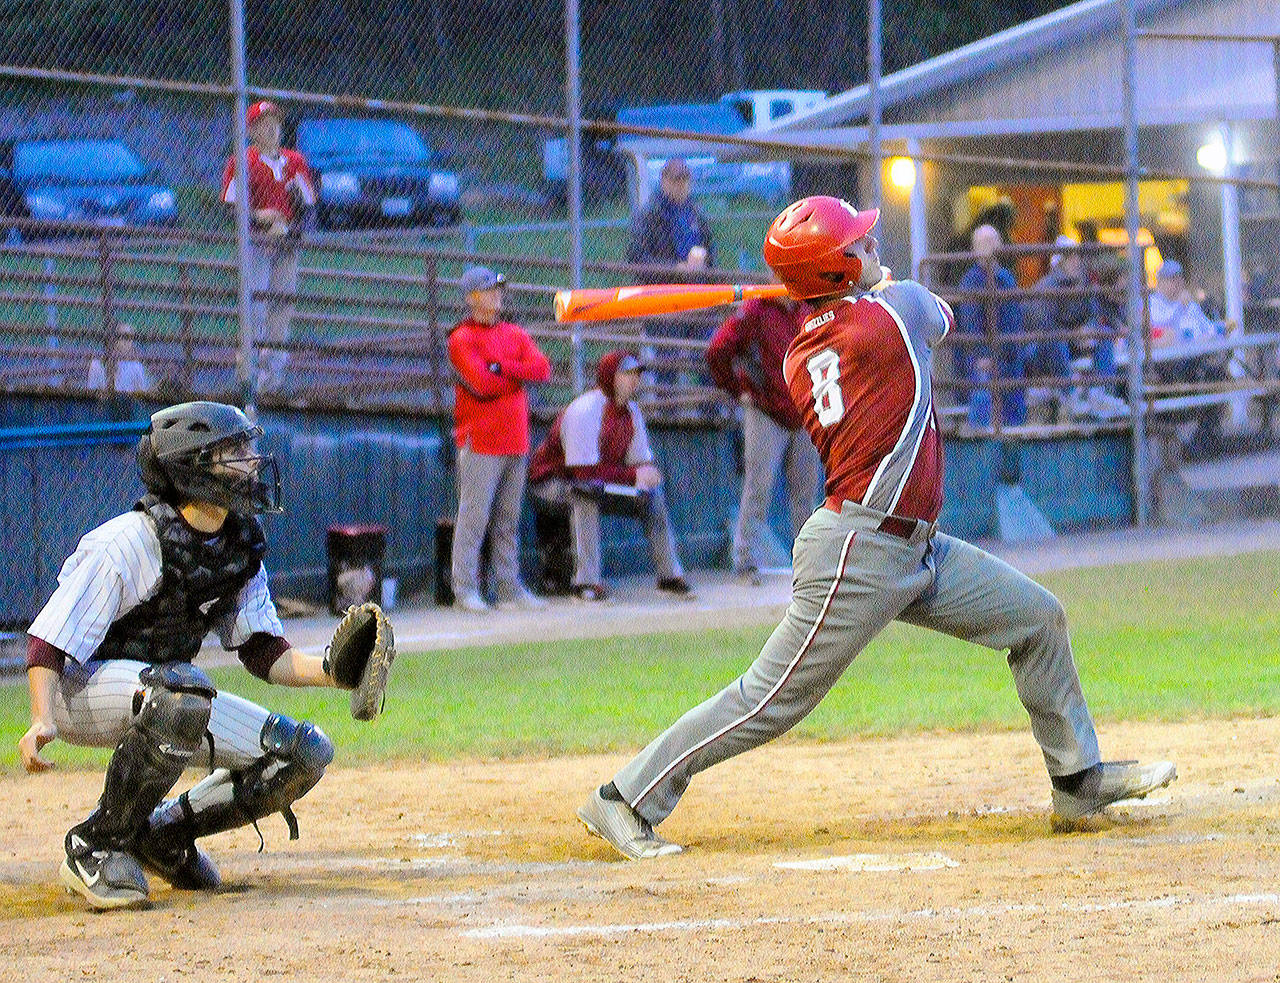 Hoquiam’s Payton Quintanilla launches a double into the left-centerfield gap in the fourth inning against Montesano. (Hasani Grayson | Grays Harbor News Group)